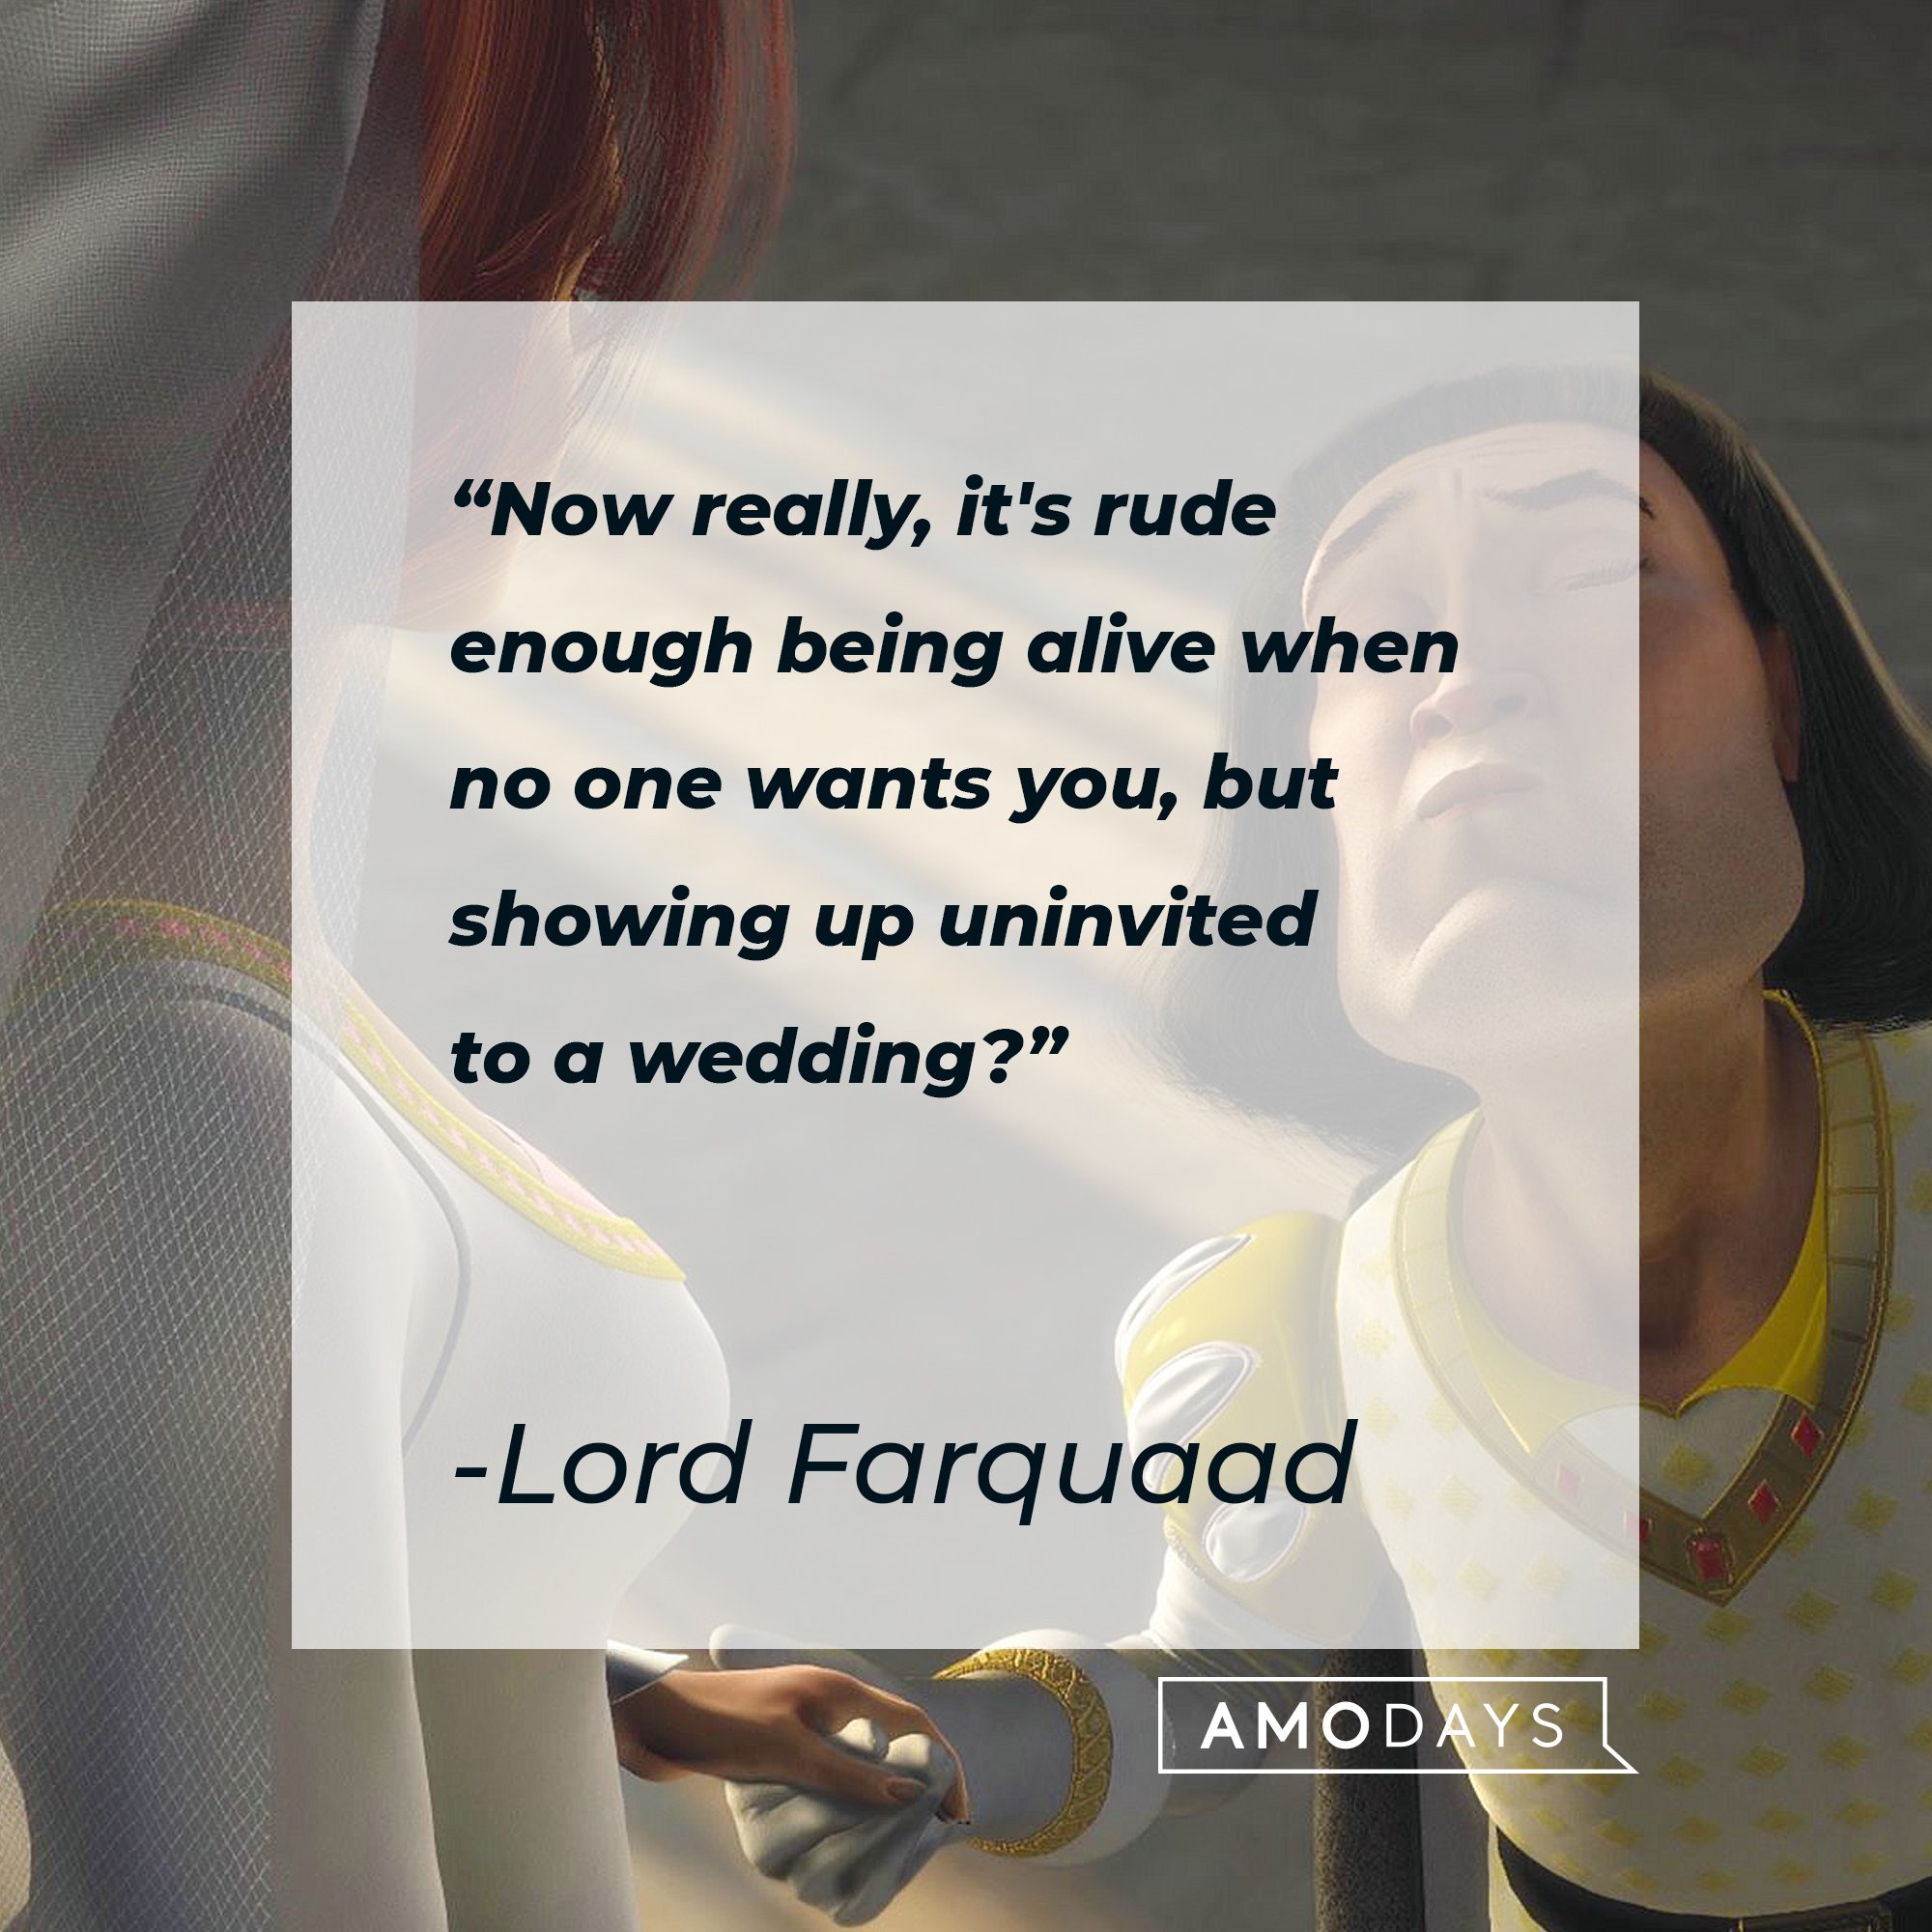 Lord Farquaad’s quote: "Now really, it's rude enough being alive when no one wants you, but showing up uninvited to a wedding?" | Image: AmoDays 